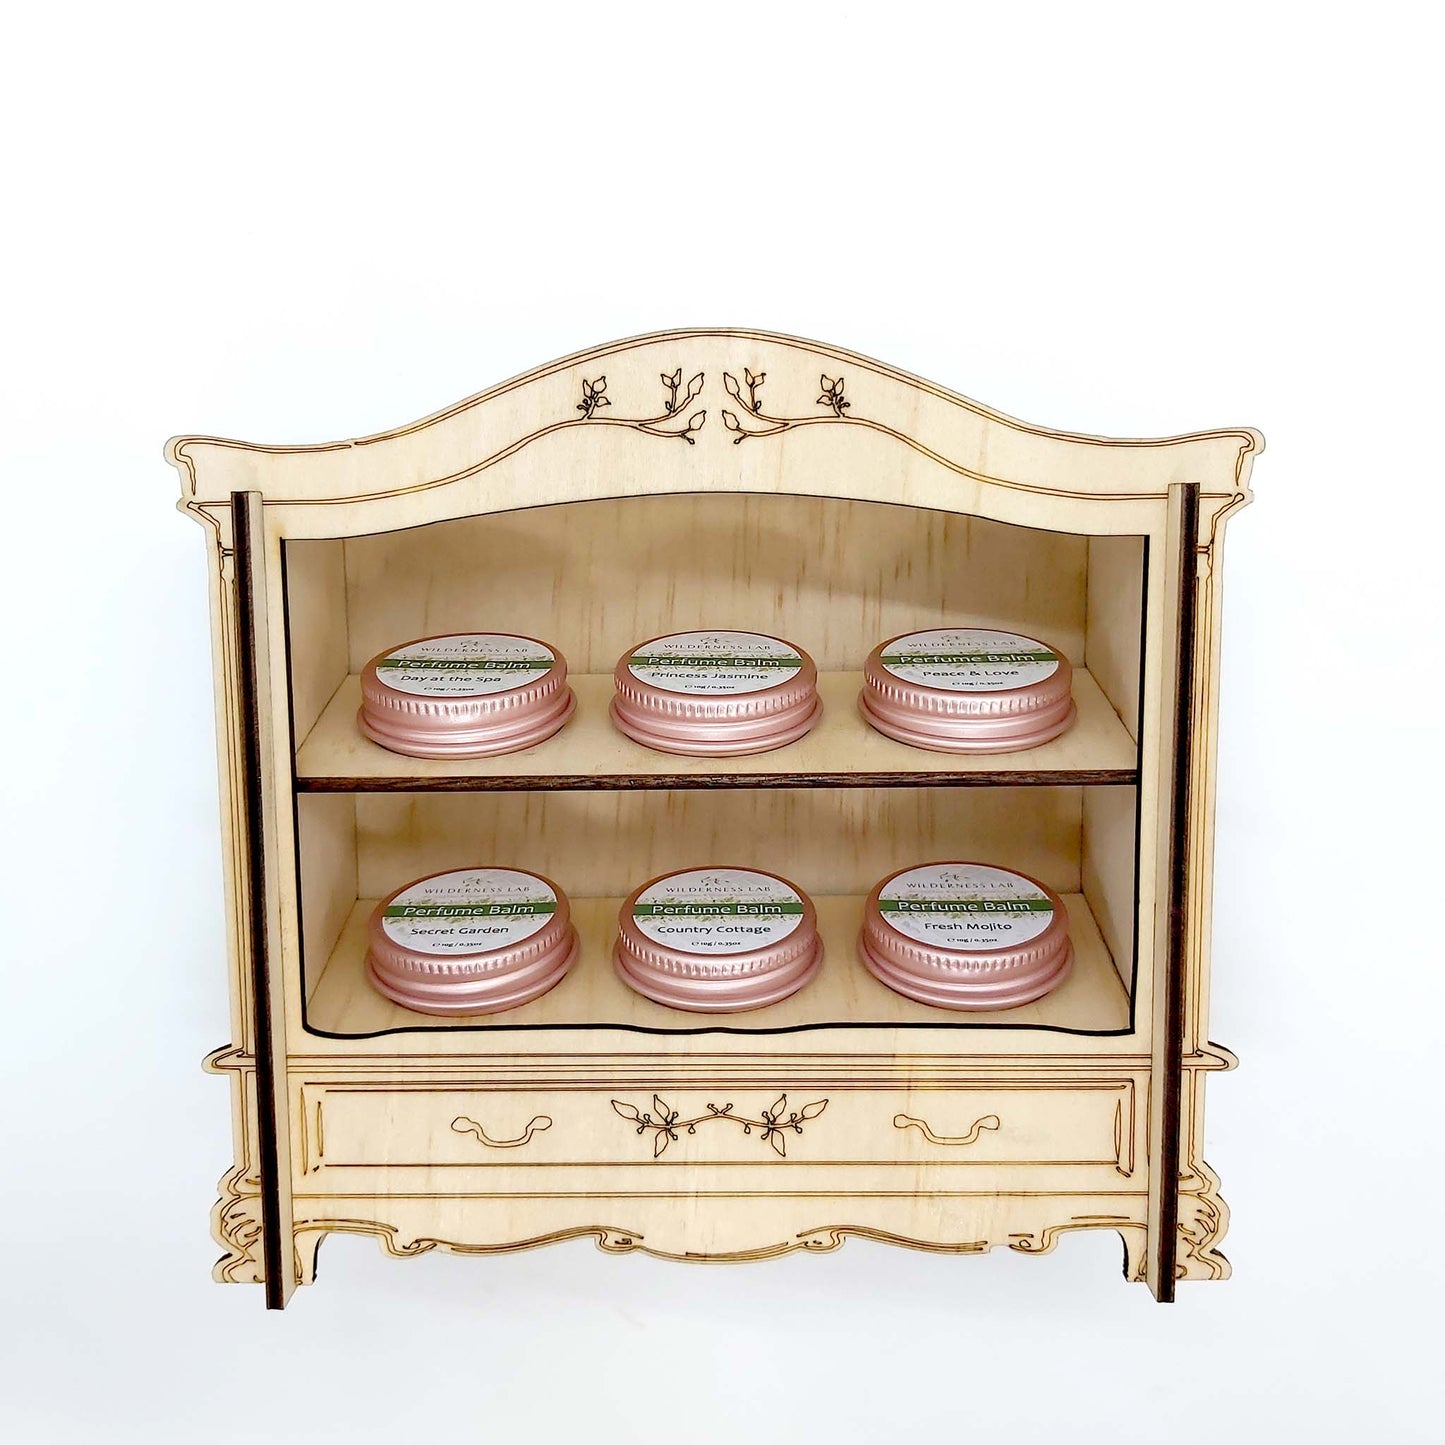 The Fragrance Wardrobe - handcrafted timber display for your favourite Perfume Balms